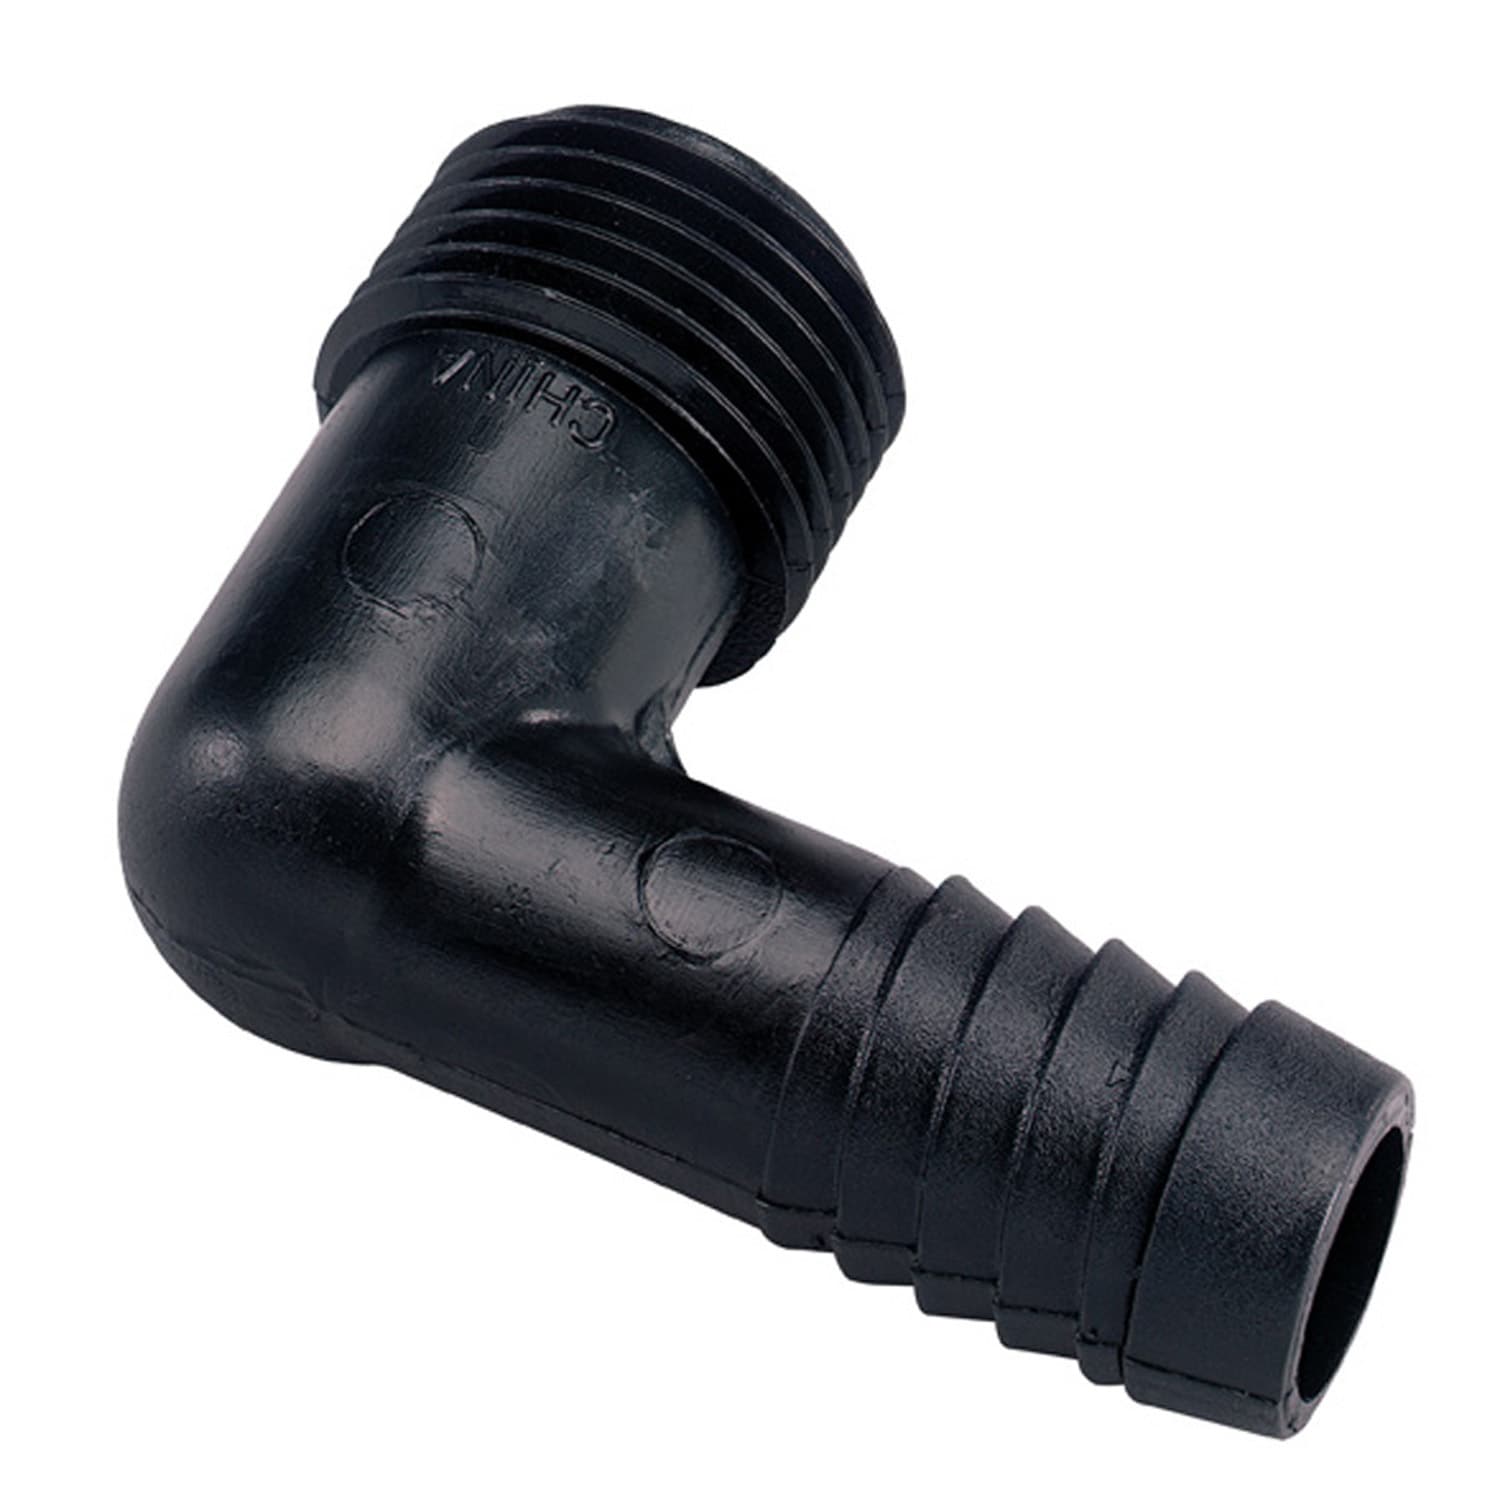 8 Tees Maitys Irrigation Fittings Kit for Tubing 32 Piece Set Garden Lawn or Flower Bed Patio 8 Elbows and 8 End Cap Plugs Barbed Connectors for Drip Sprinkler Systems 8 Couplings 1/2 Inch 